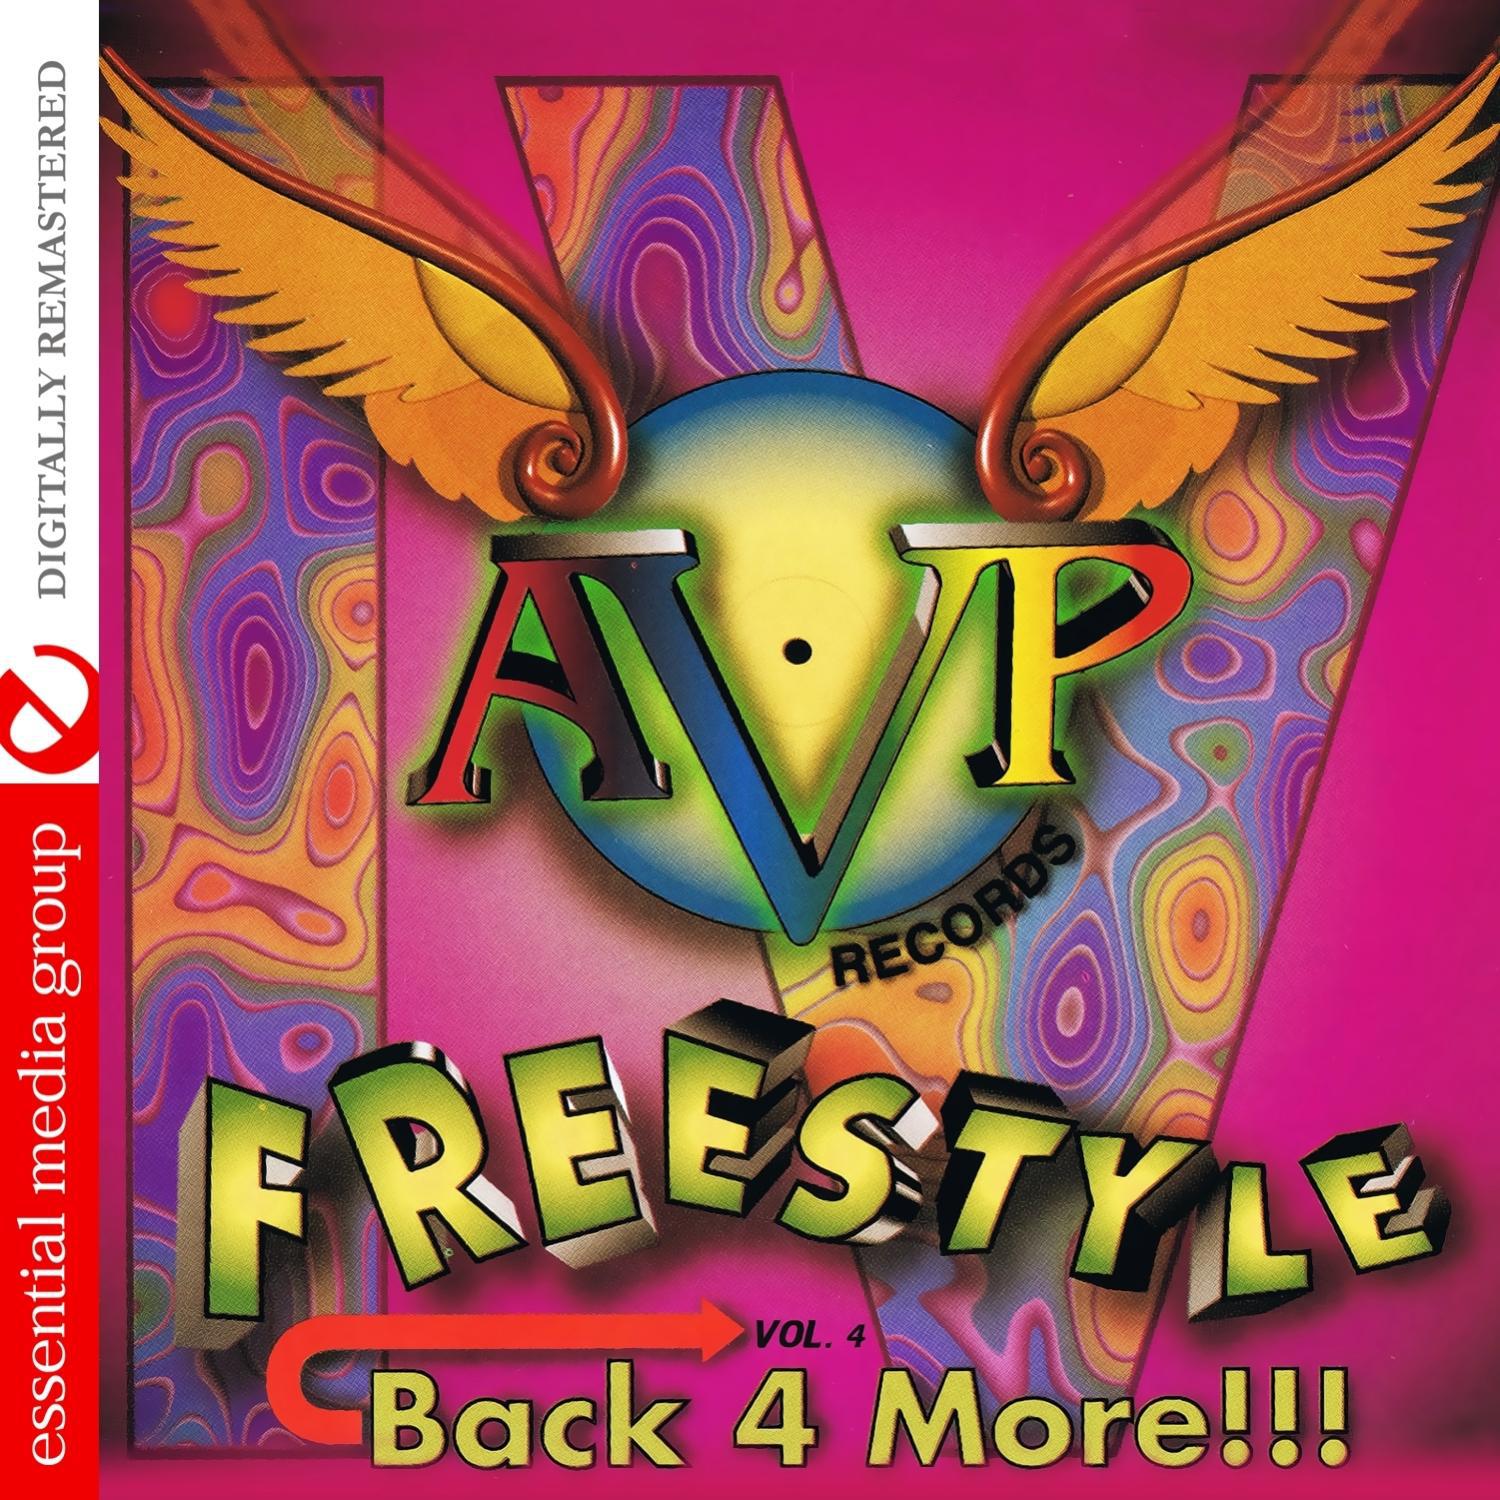 AVP Records Presents Freestyle Vol. 4: Back 4 More!!! (Digitally Remastered)